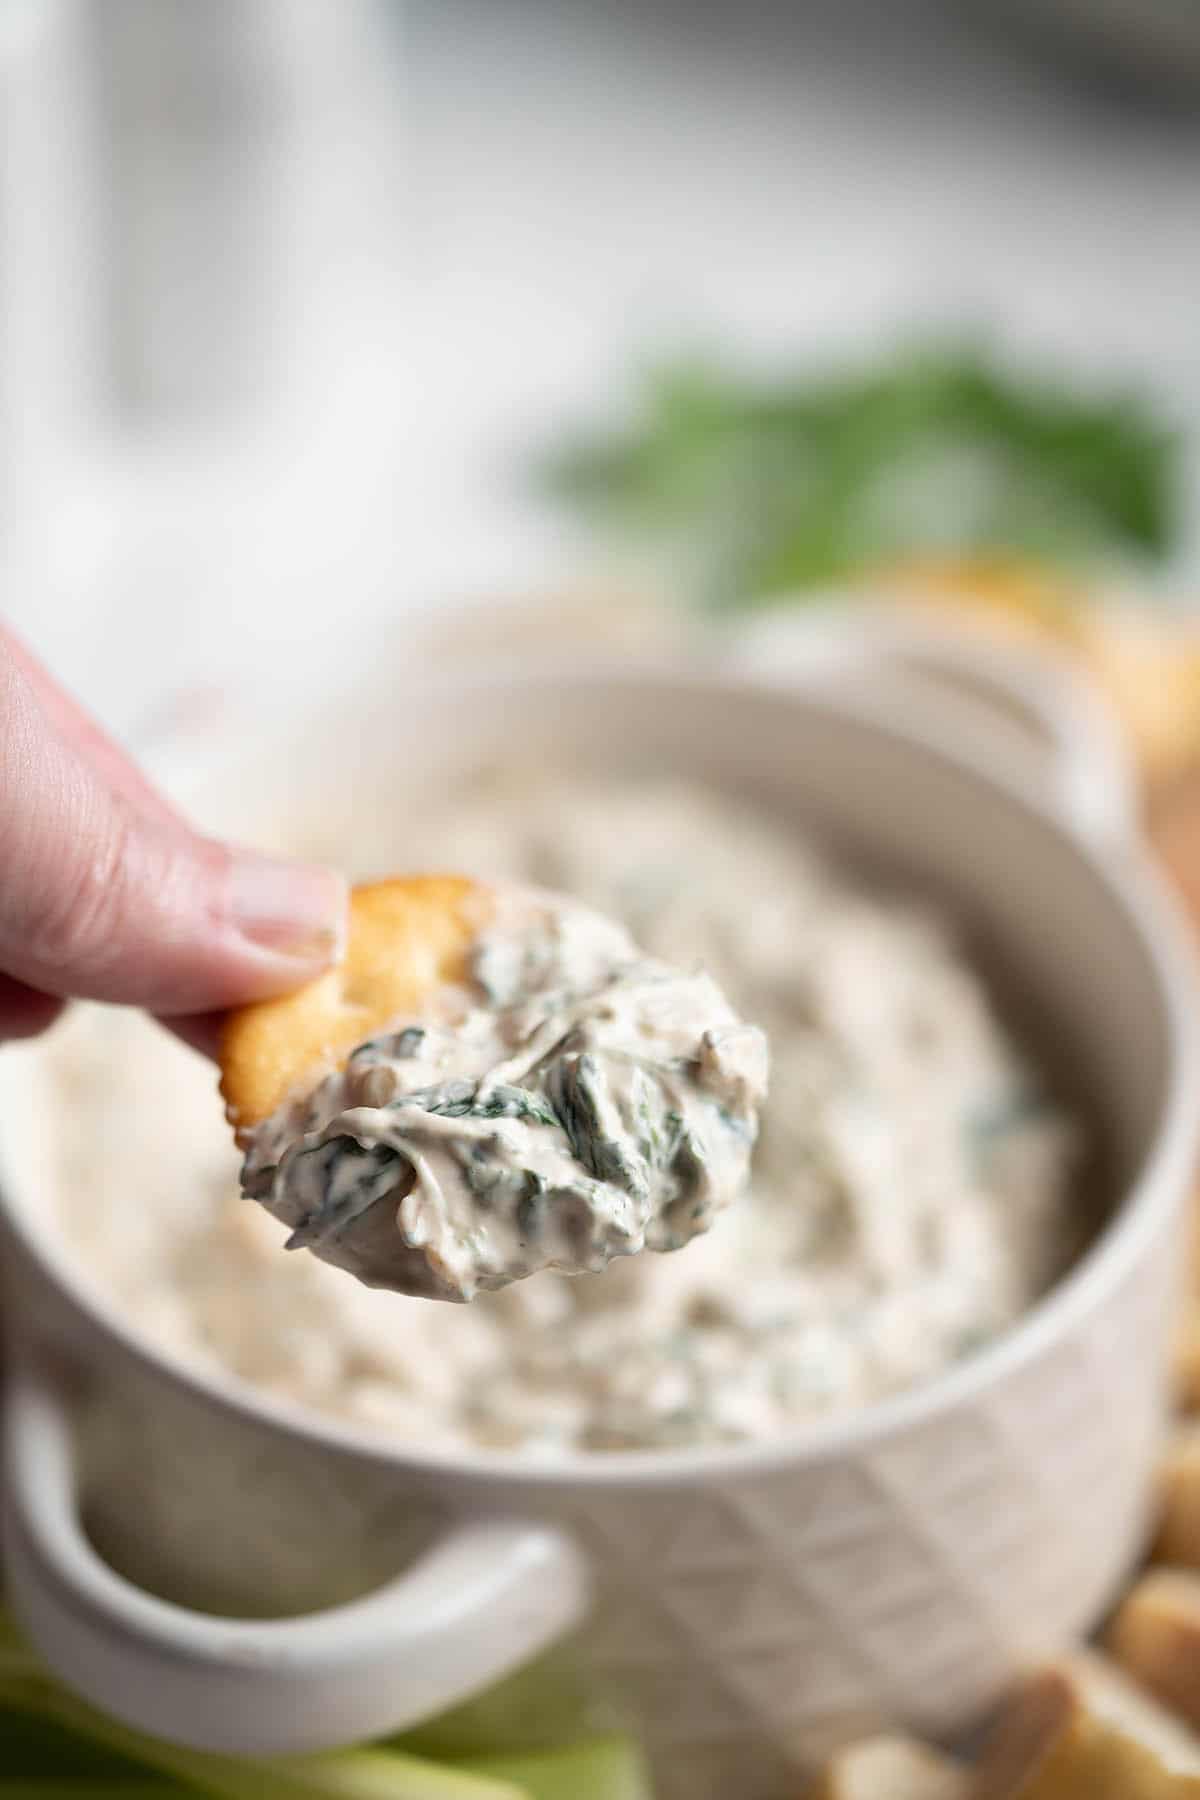 Spinach dip in a bowl with a cracker that had just been dipped in it.